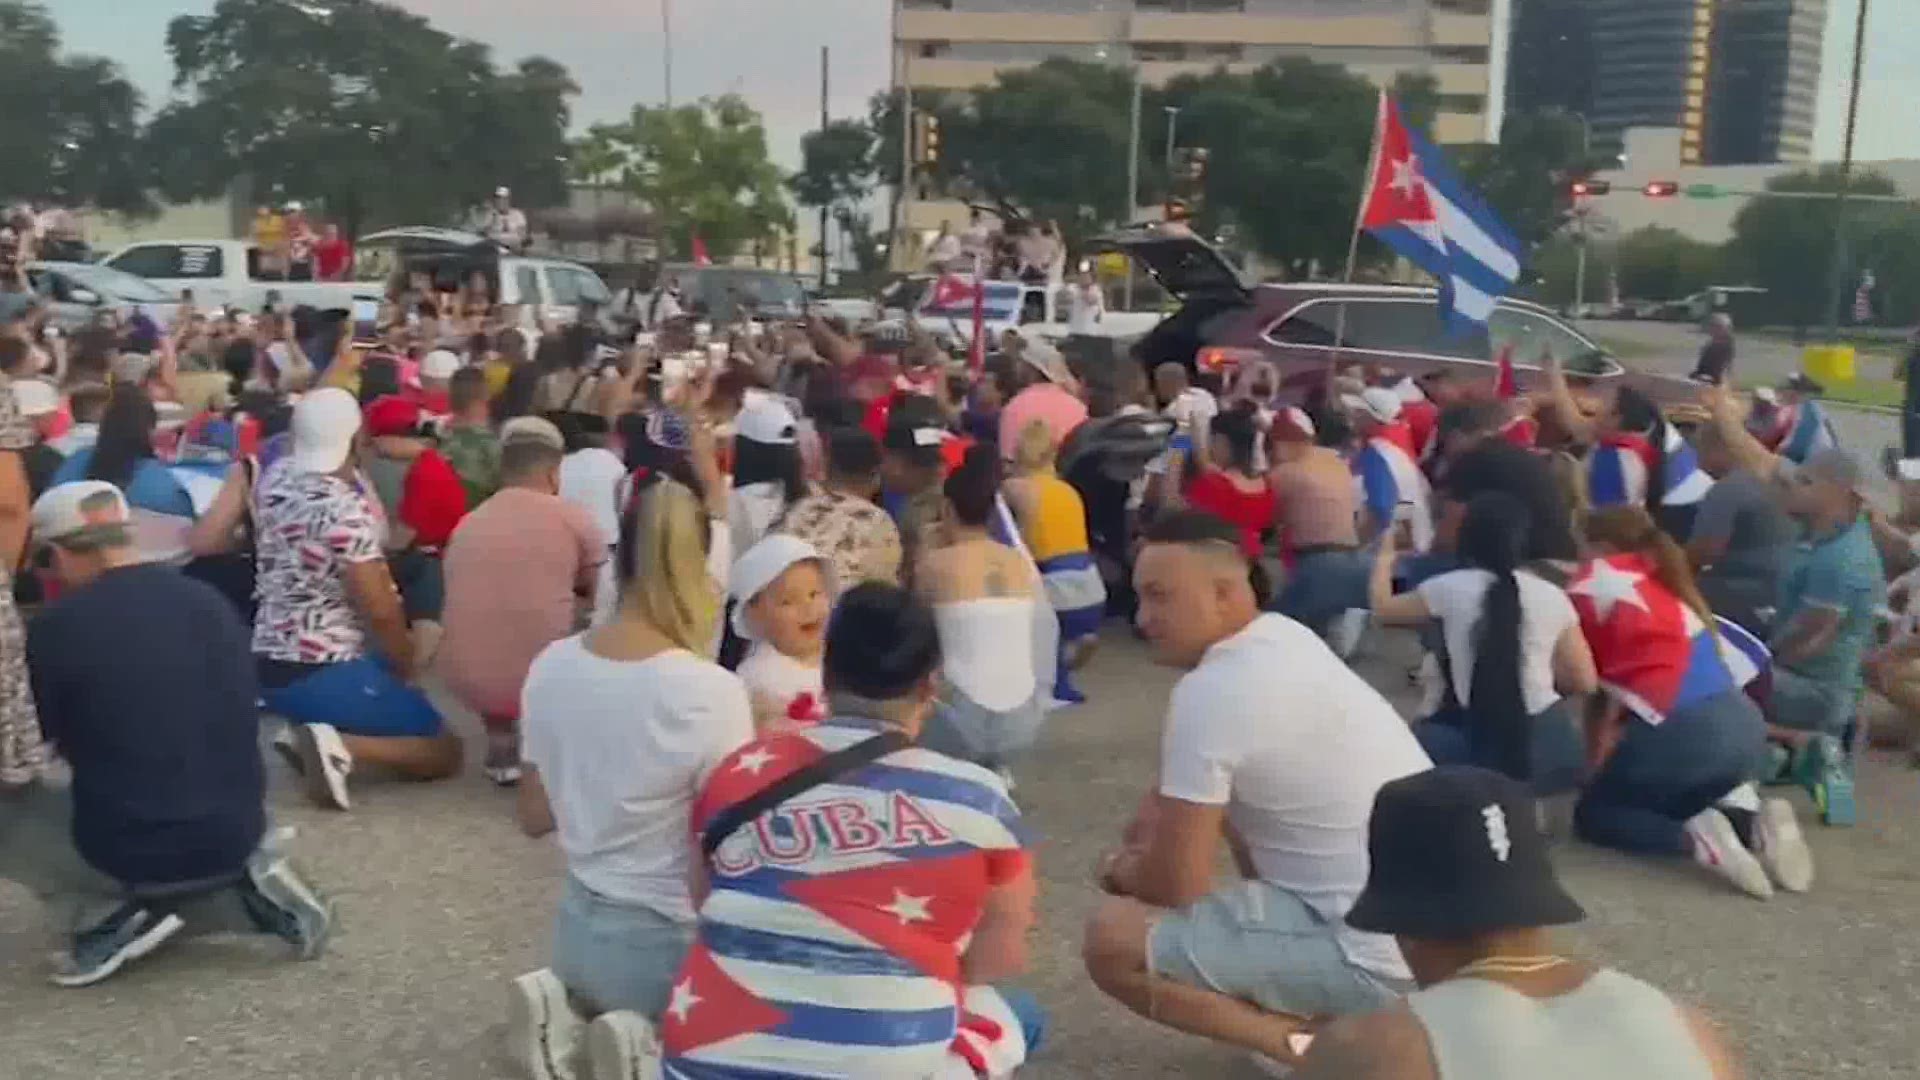 "Cubans don't have access to medical care. Cubans don't have transportation. Cubans practically don't have human rights. They don't live with dignity."